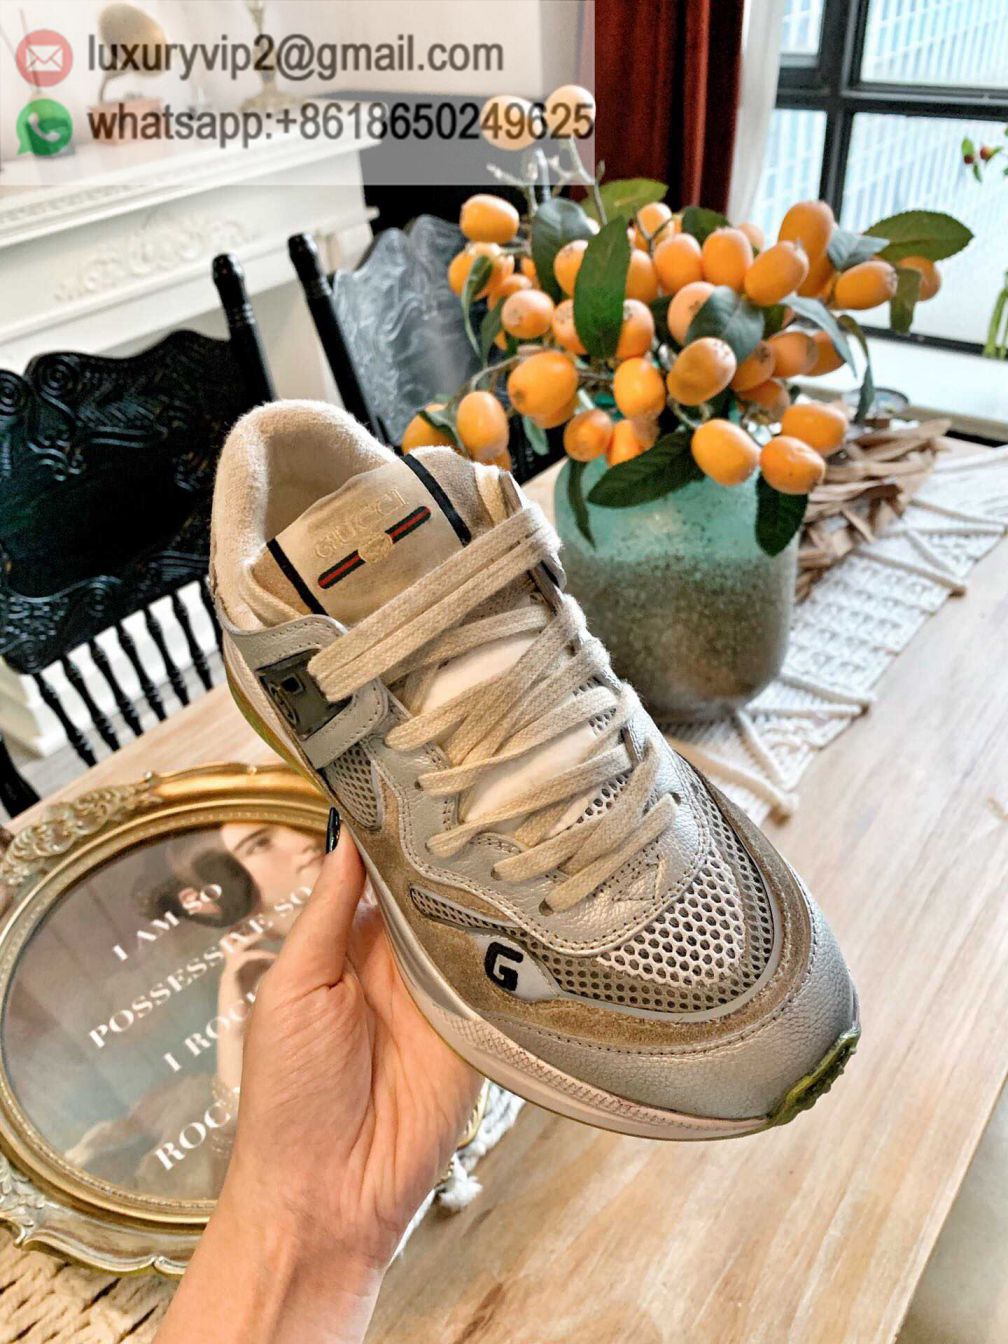 GG 2019 Ultrapace Unisex Sneakers